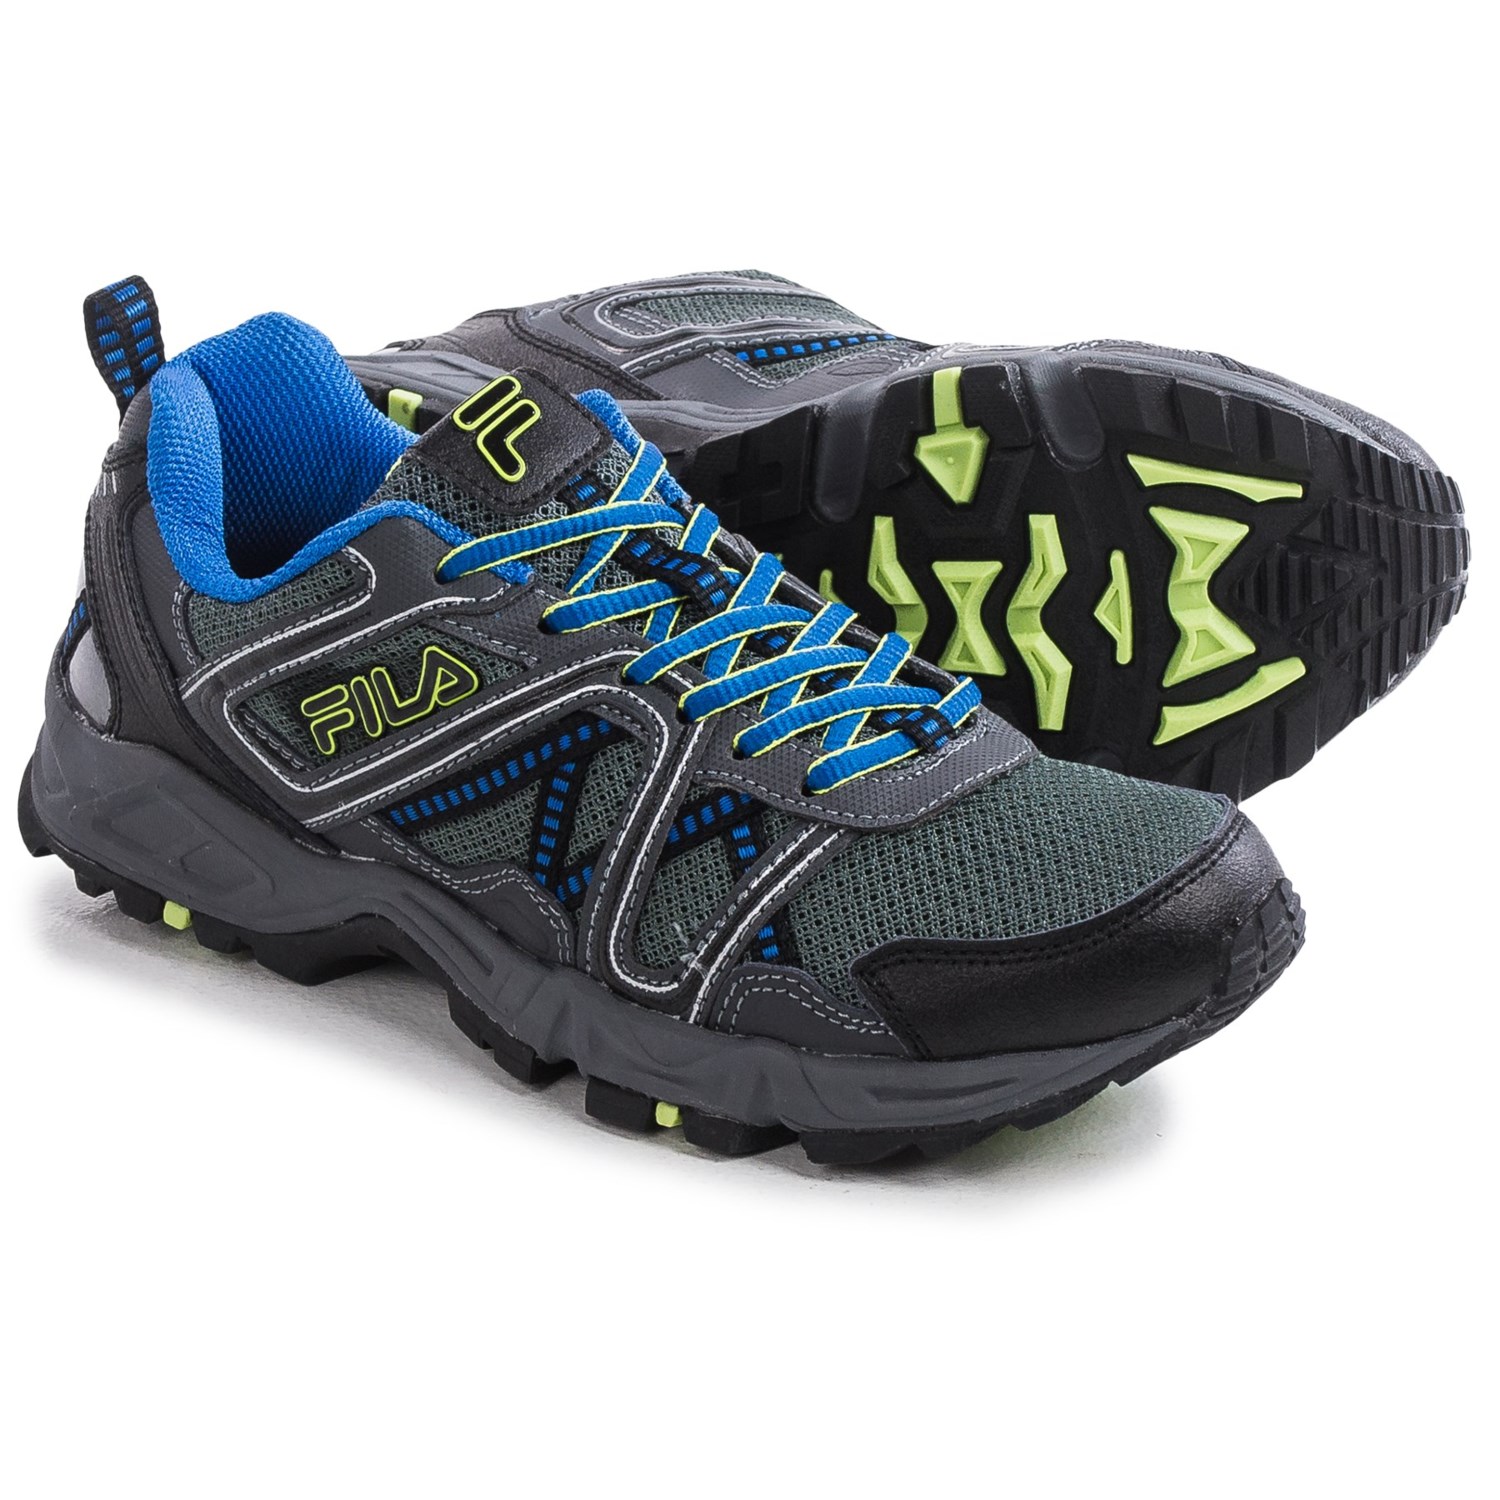 Fila Ascente 15 Trail Running Shoes (For Men) - Save 57%